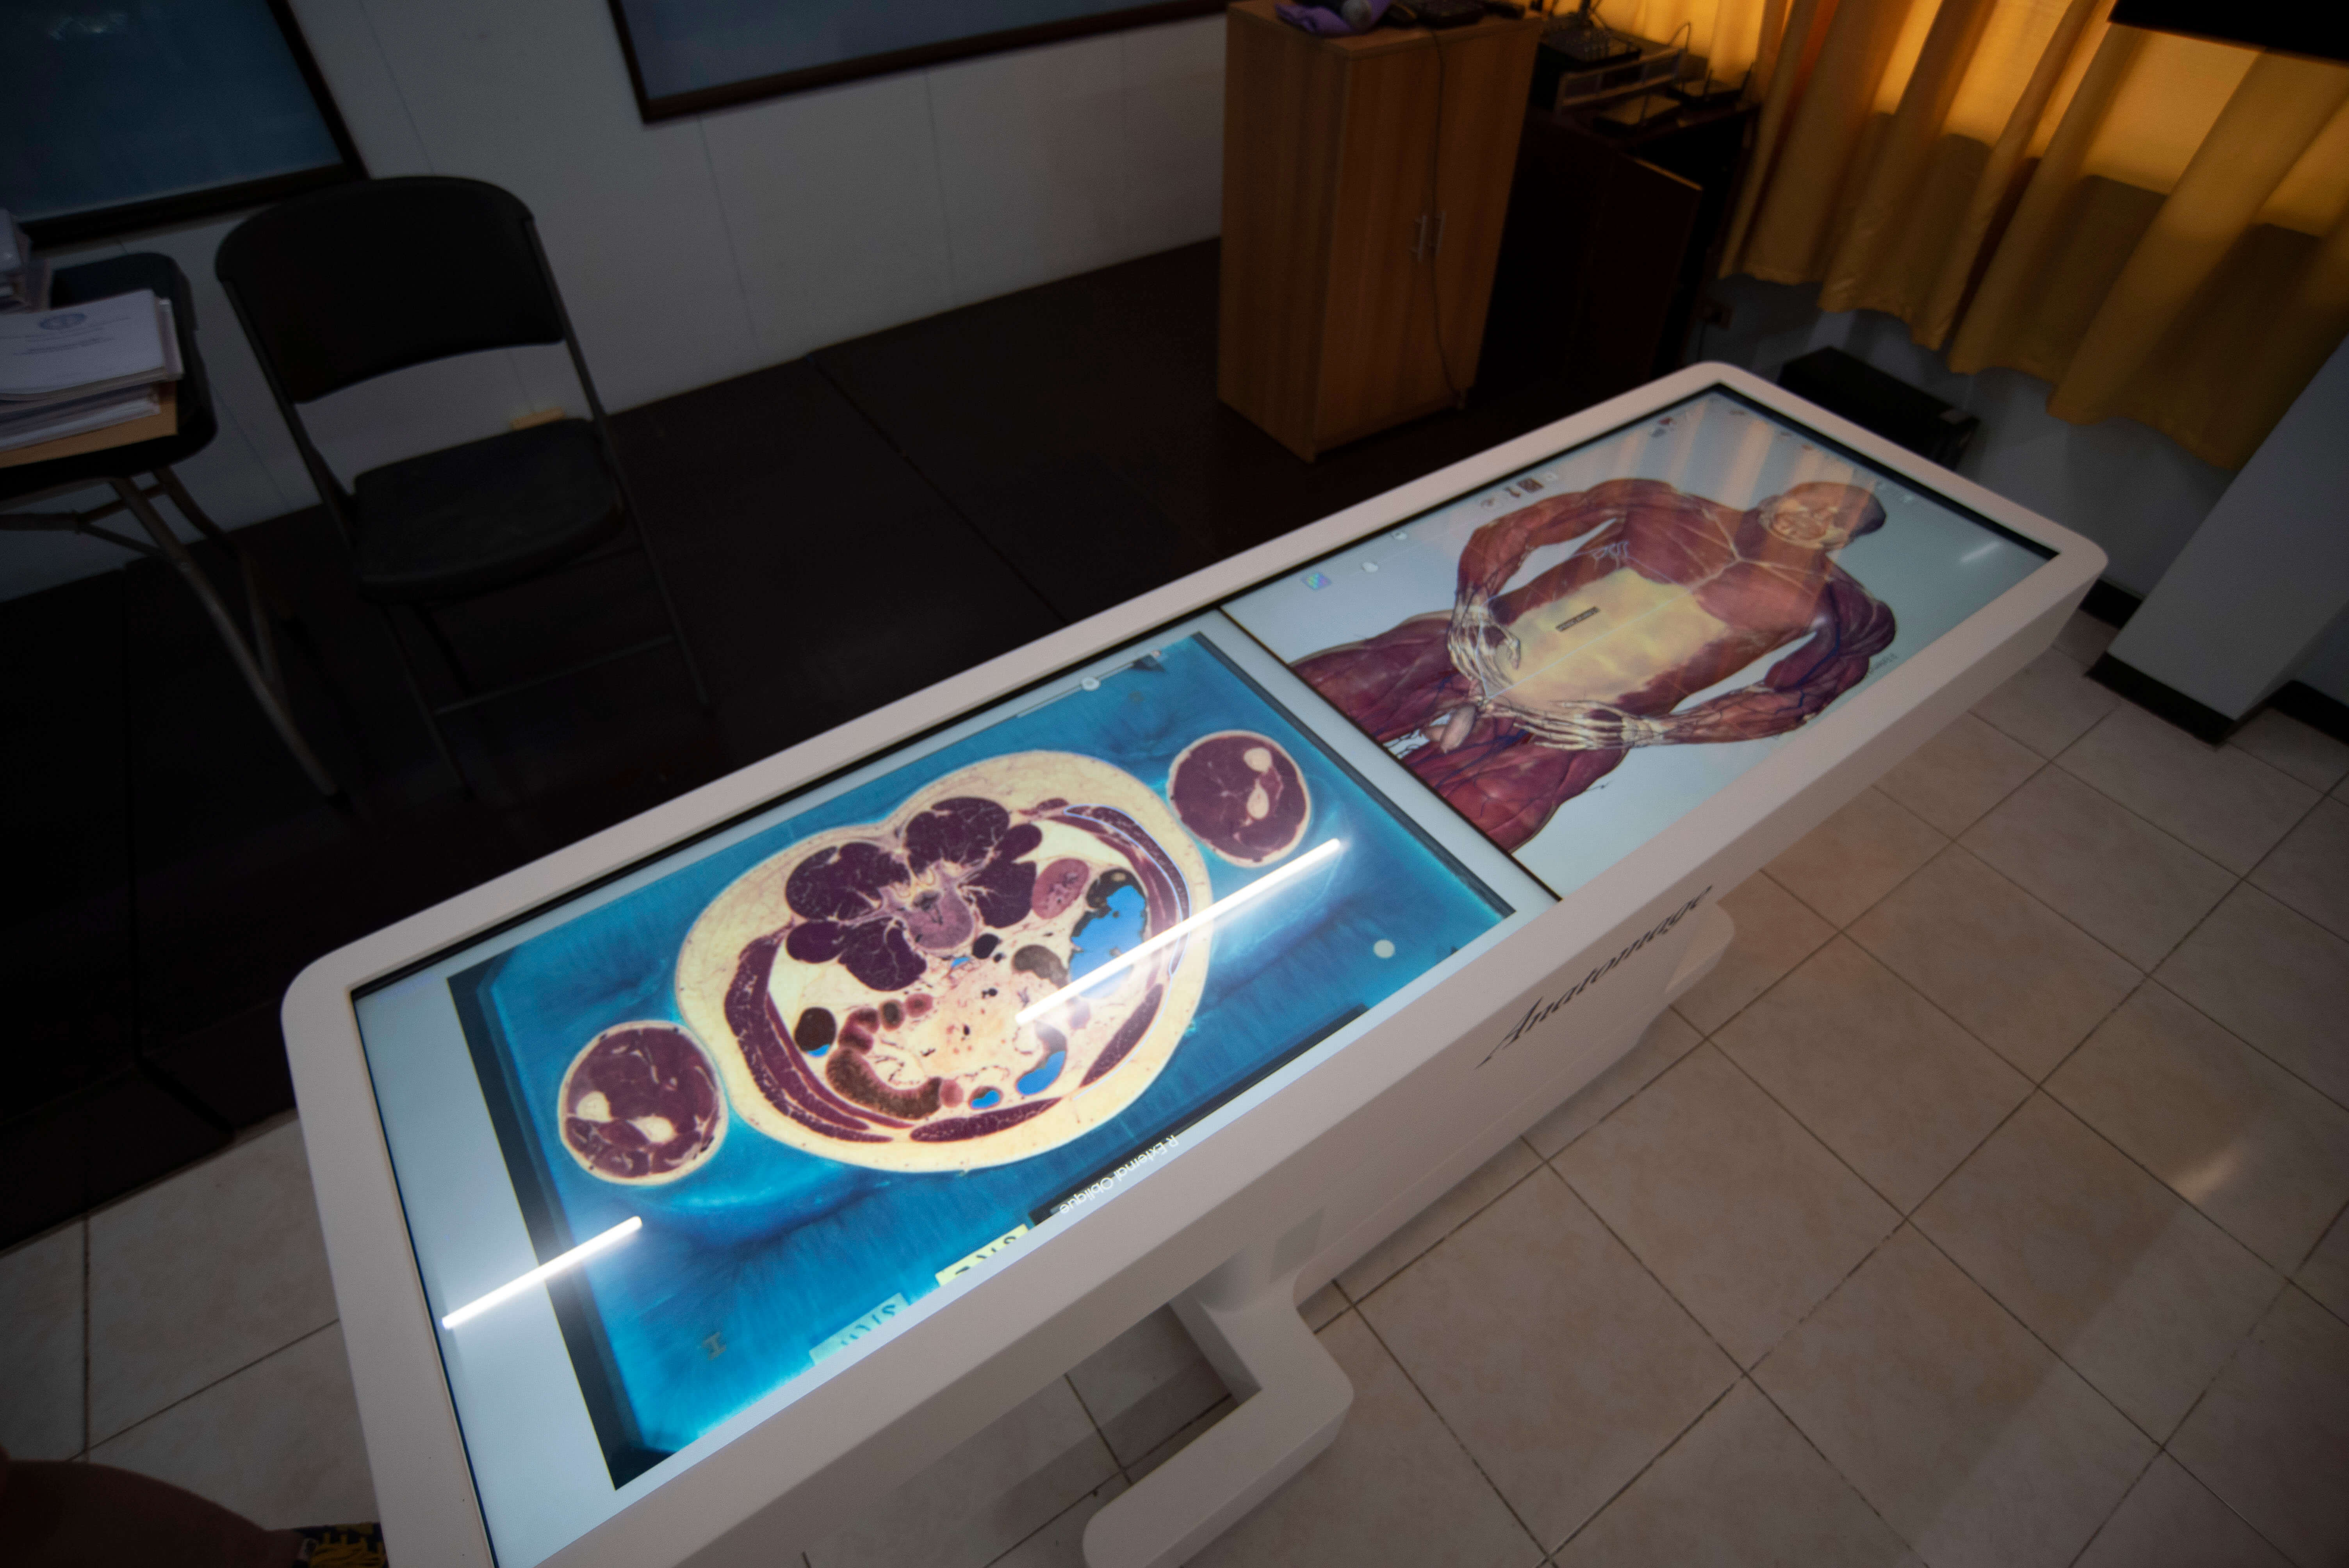 DMSF-modernizes-medical-education-with-3D-Anatomage-Table-A-New-Age-Tool-for-Anatomy